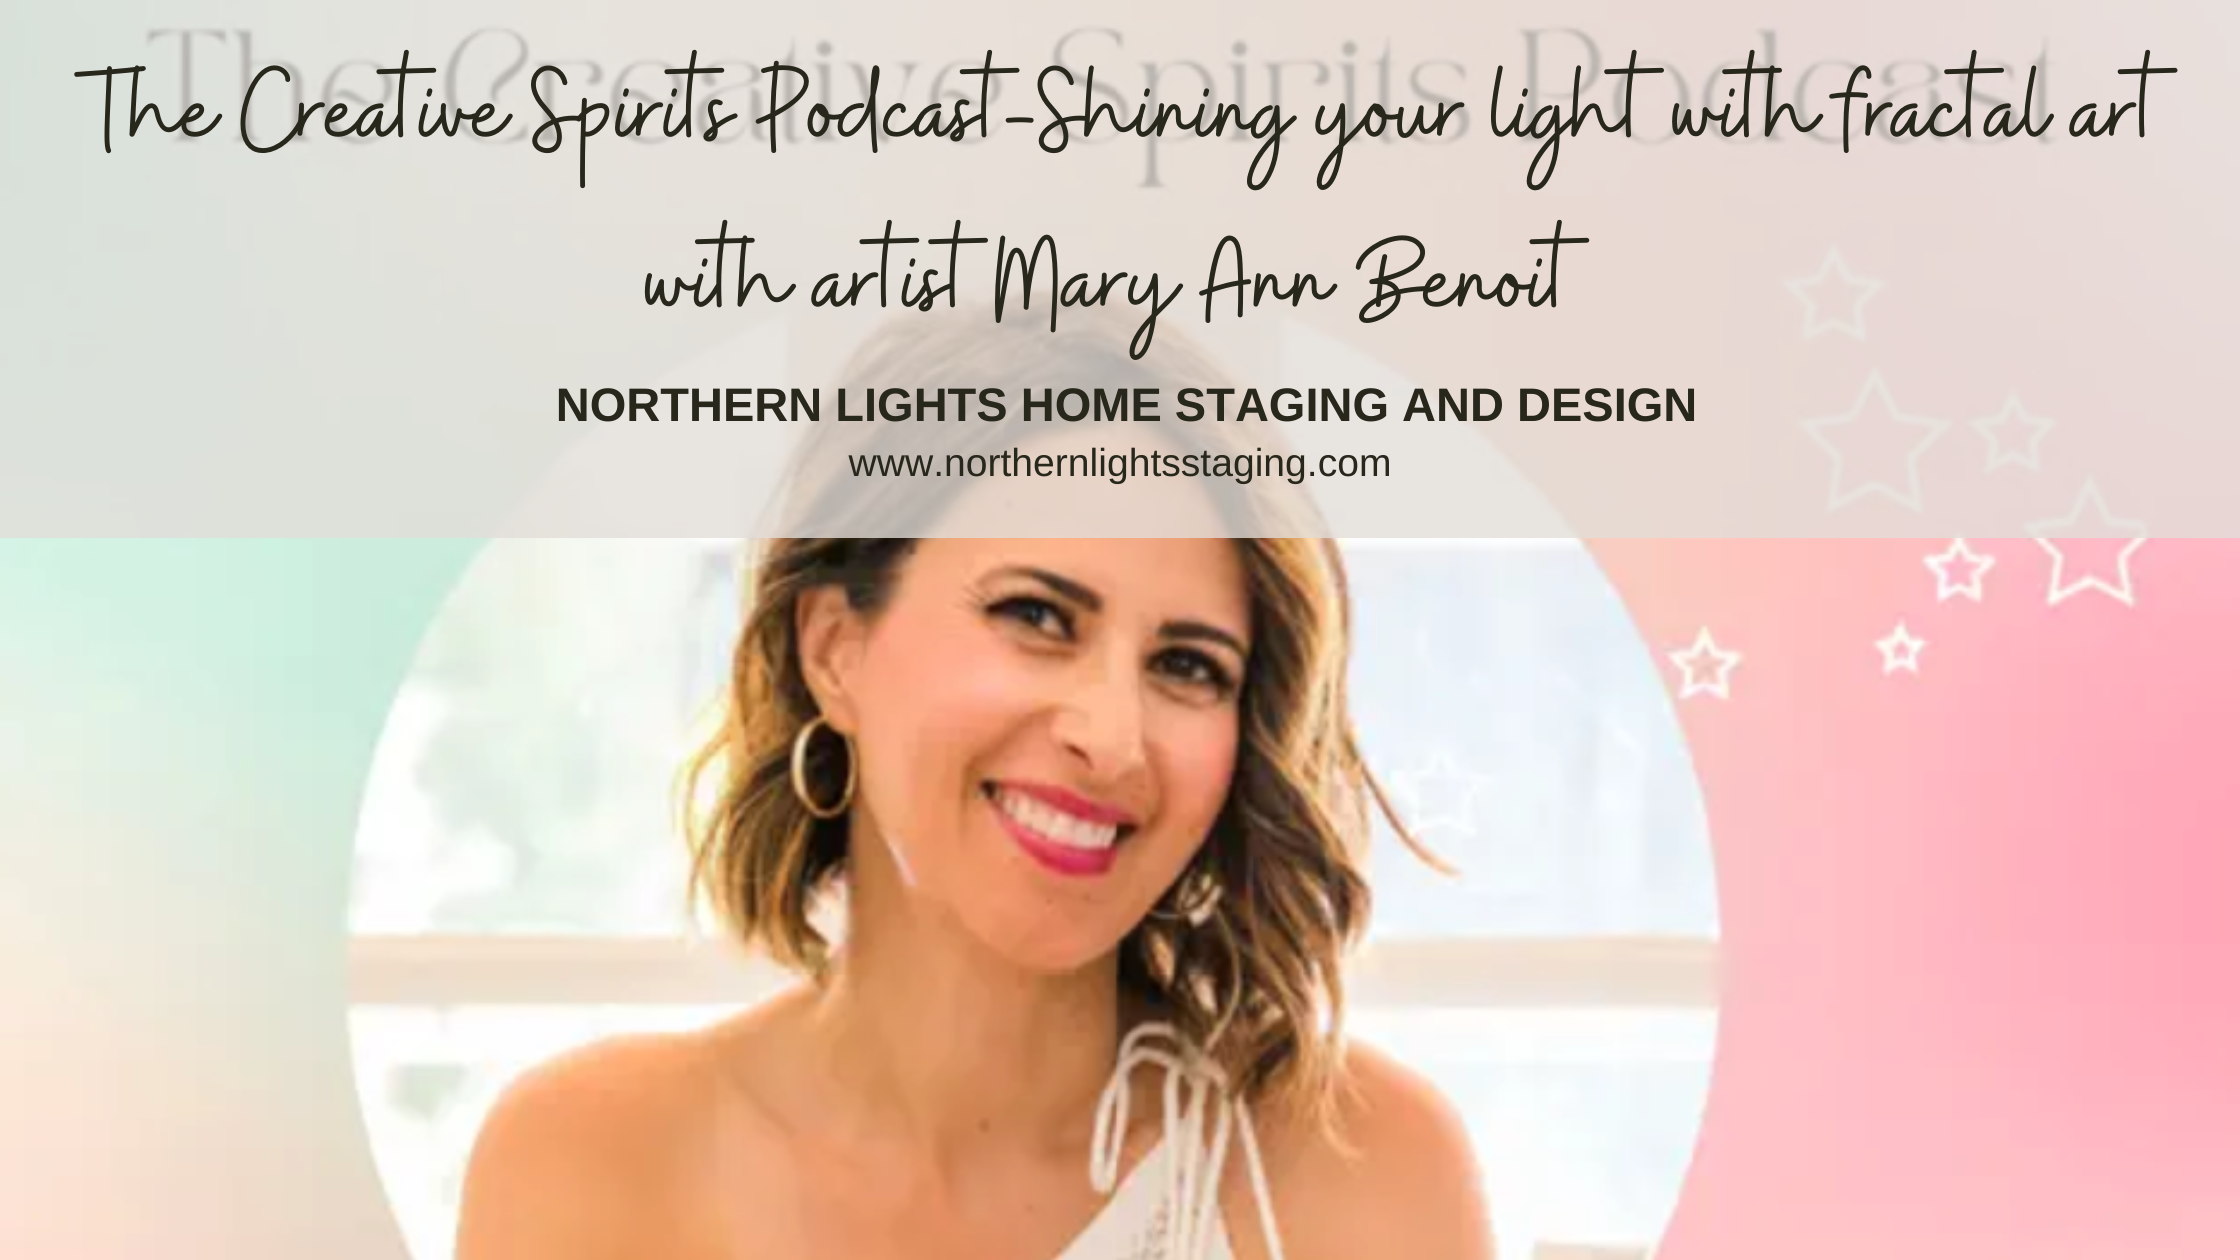 The Creative Spirits Podcast-Shining your light with fractal art with artist Mary Ann Benoit